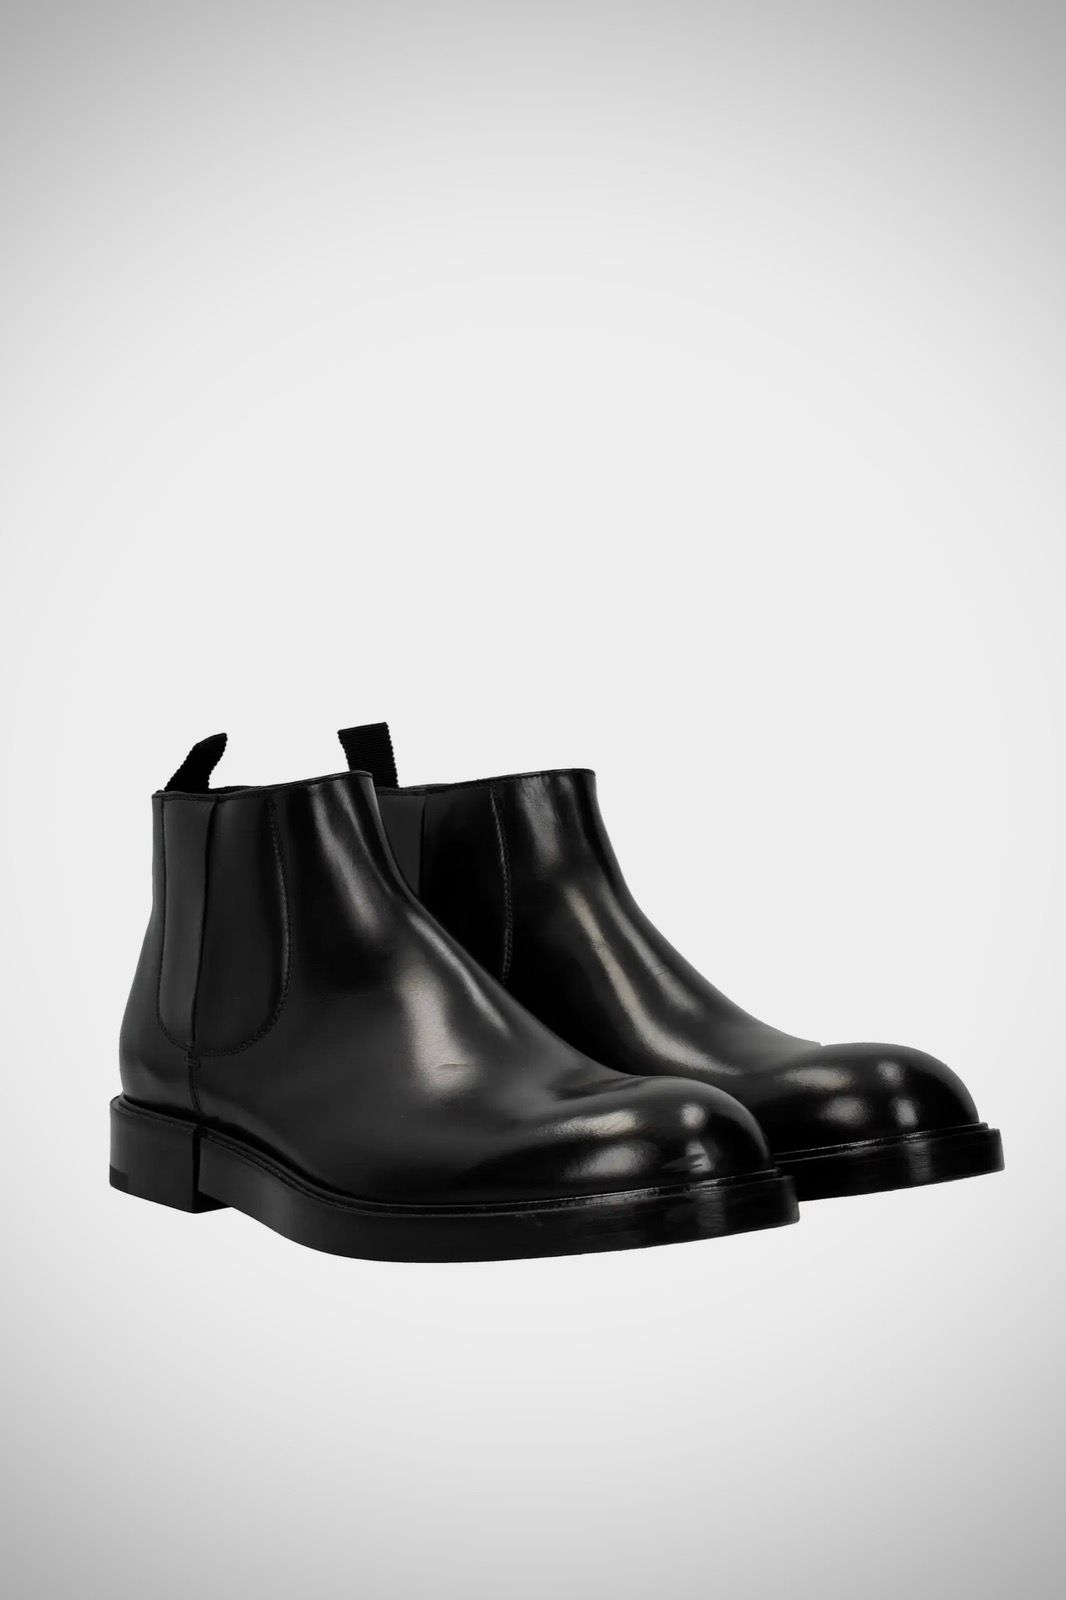 Dolce & Gabbana Chelsea boots, 45% off retail | Grailed